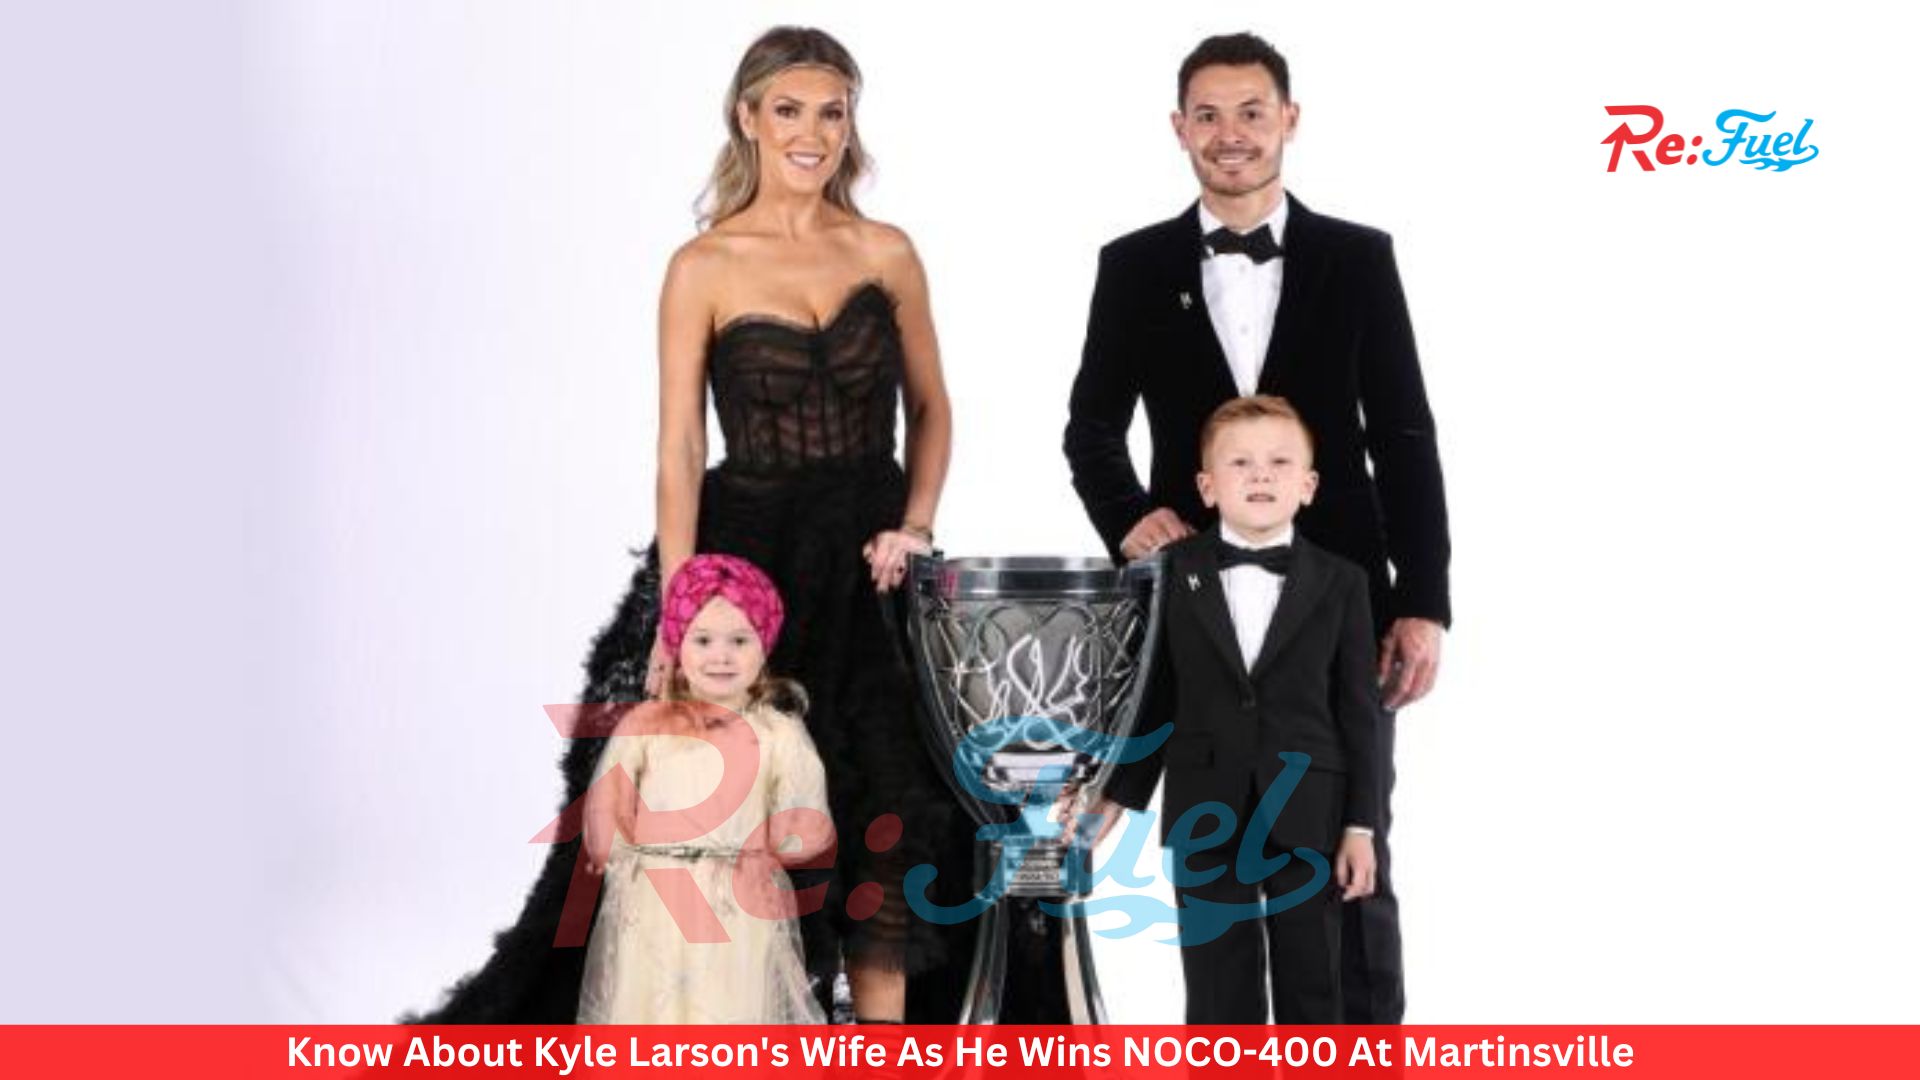 Know About Kyle Larson's Wife As He Wins NOCO-400 At Martinsville